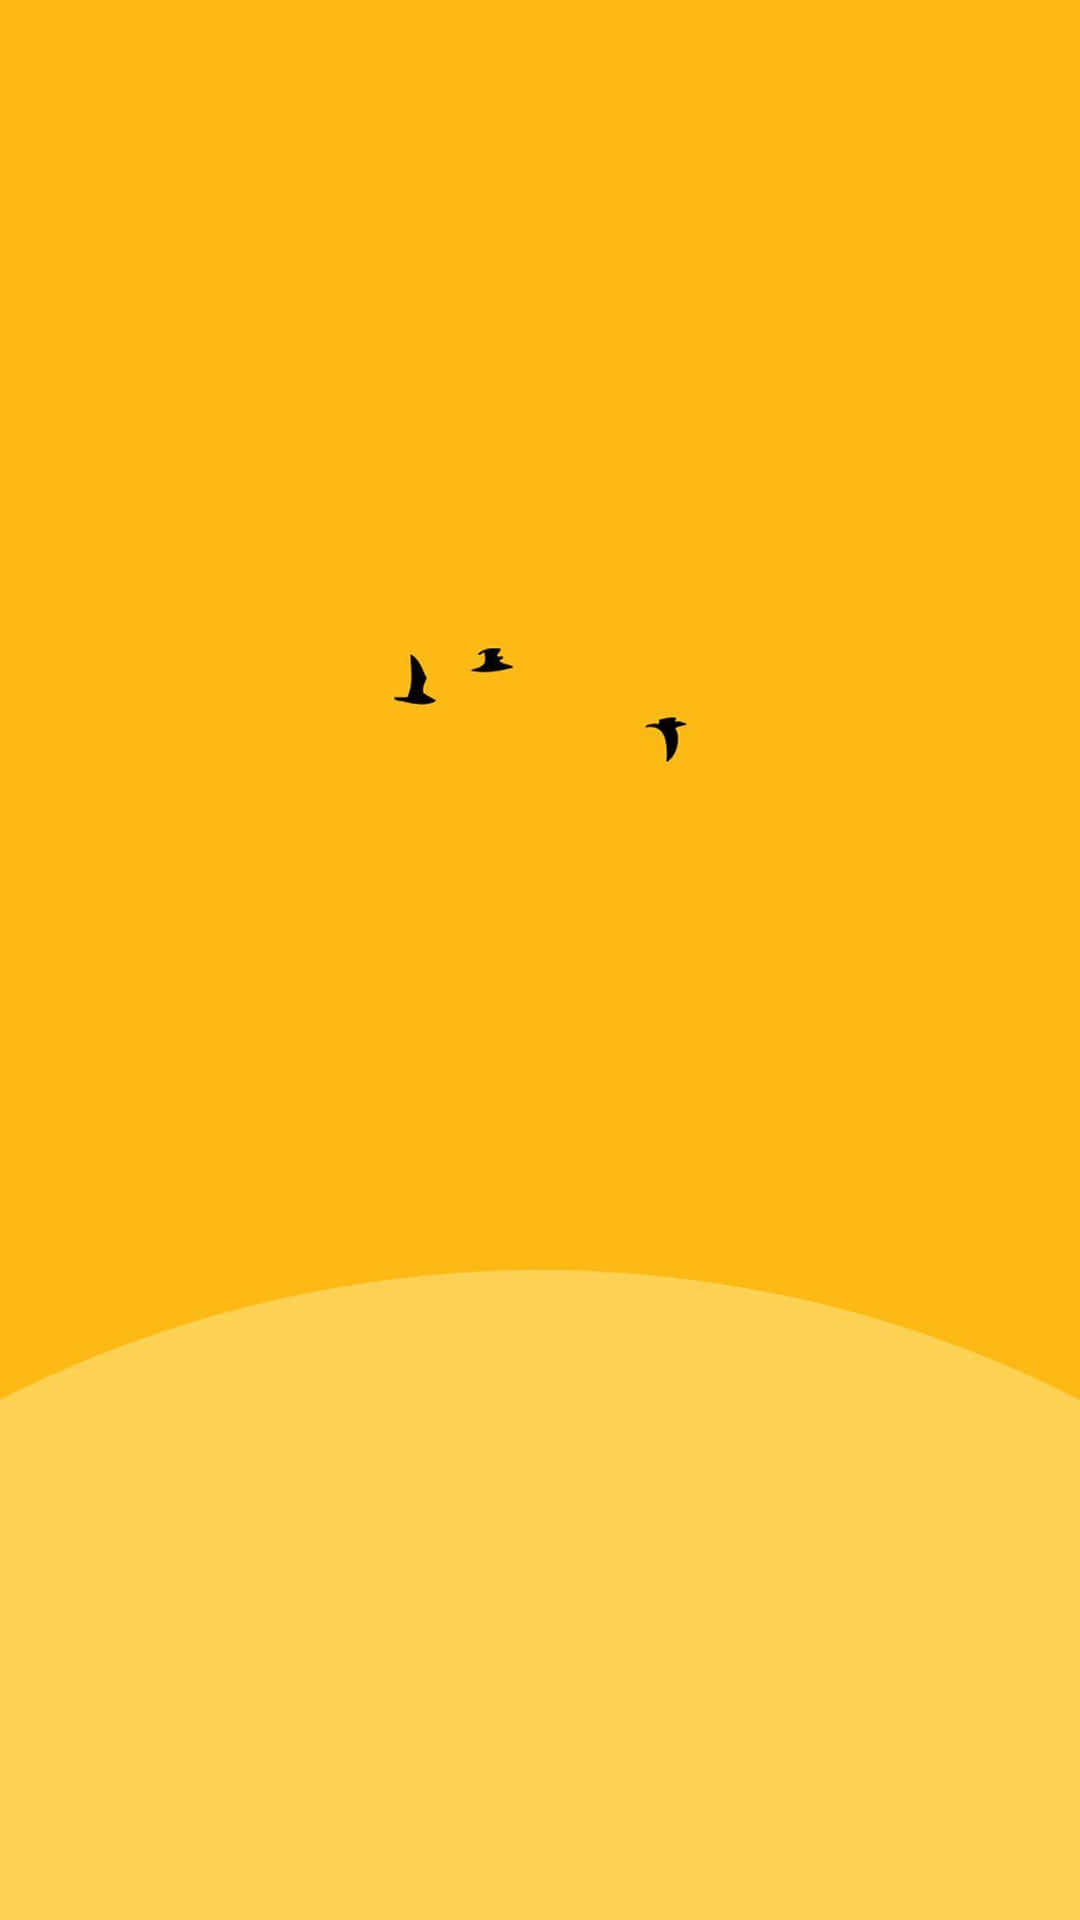 A Black And White Image Of Birds Flying Over An Orange Background